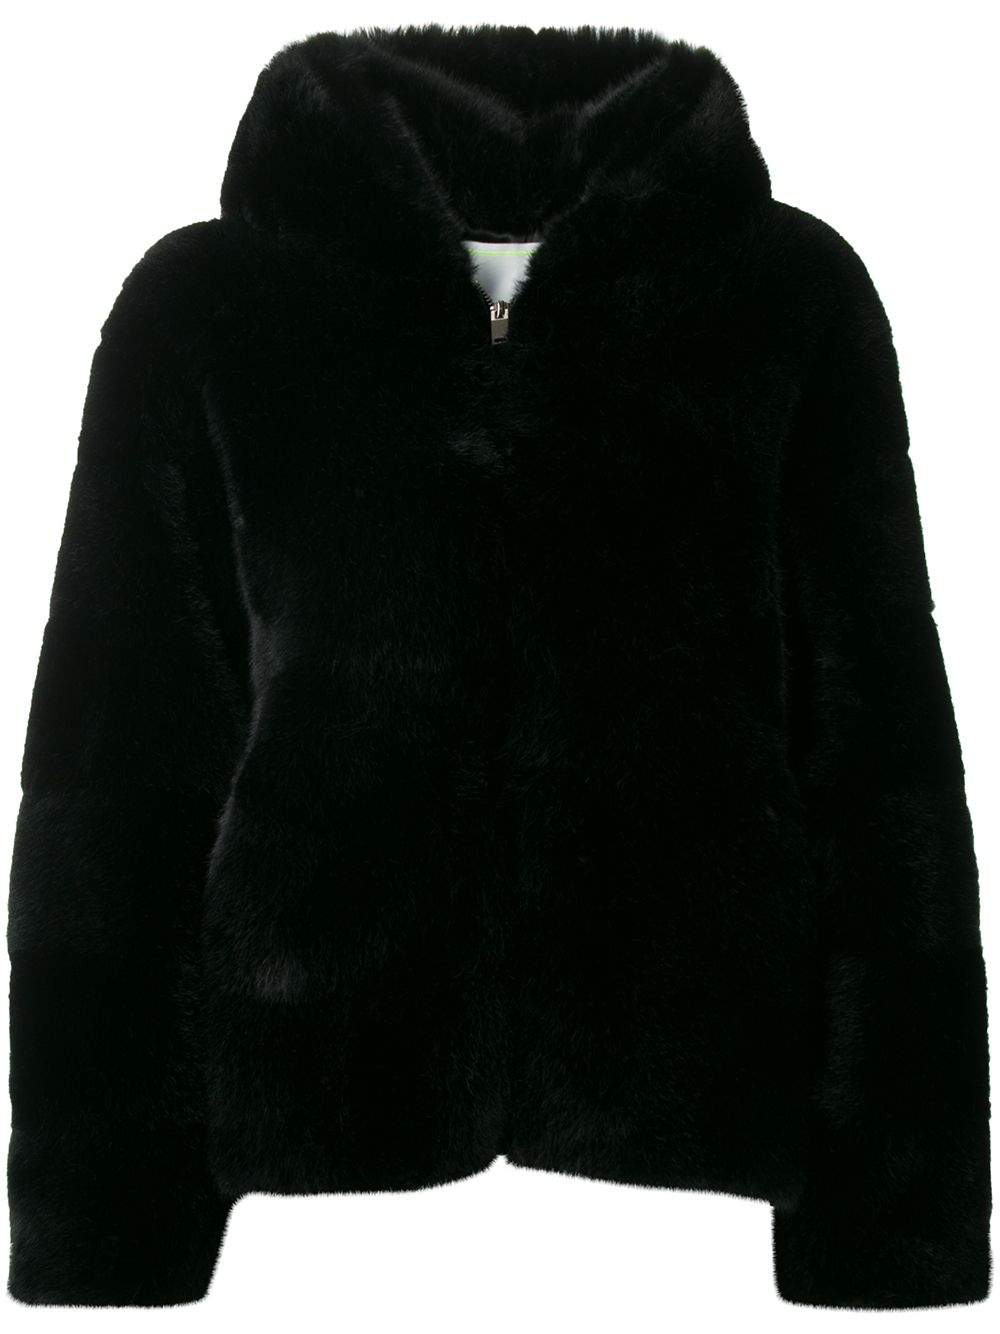 Ava Adore Hooded Faux-fur Jacket In Black